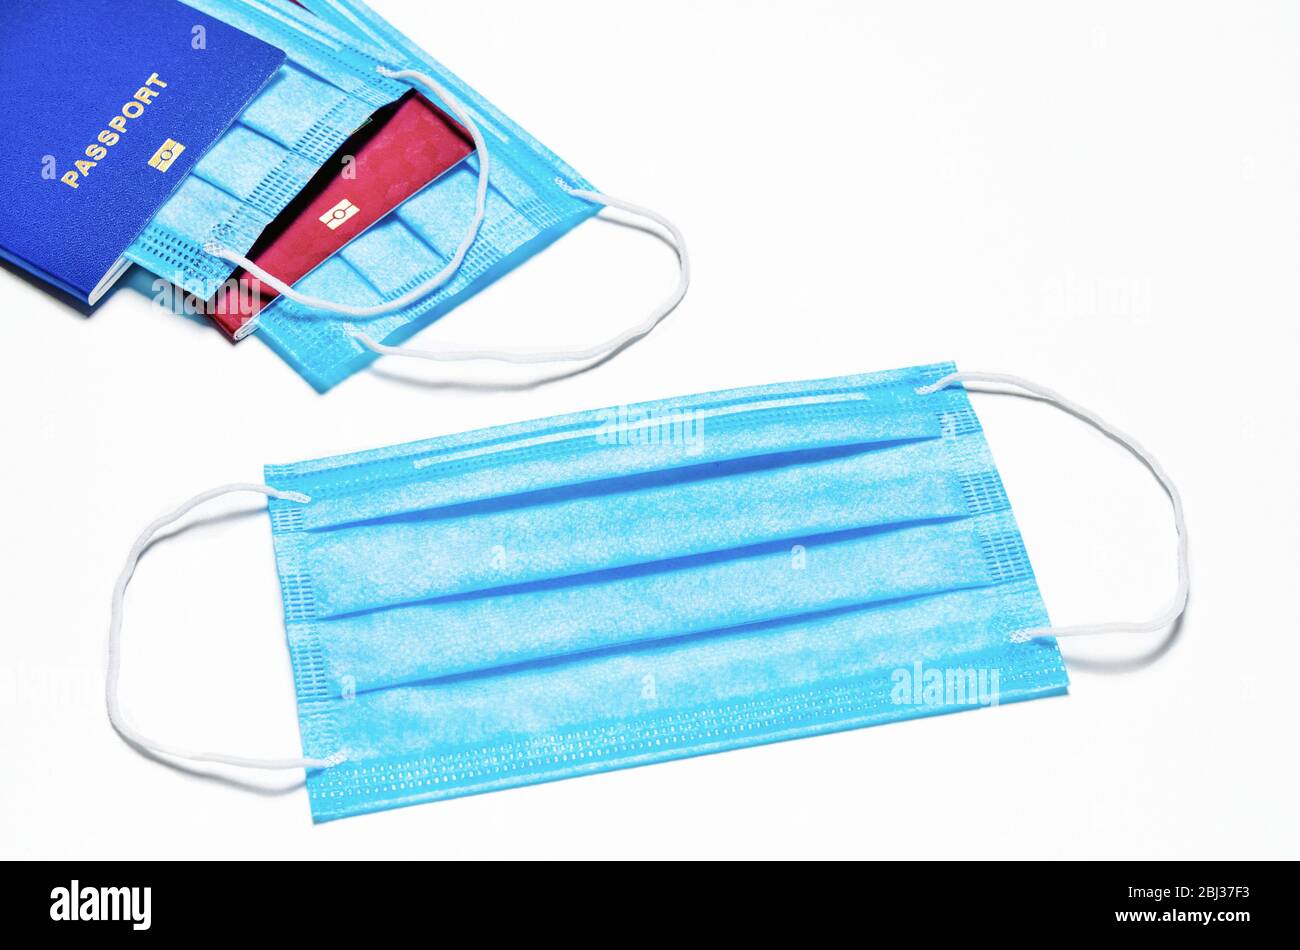 blue medical facial mask lies on a white background. in the background are two foreign passports of blue and red color with nested masks. world quaran Stock Photo